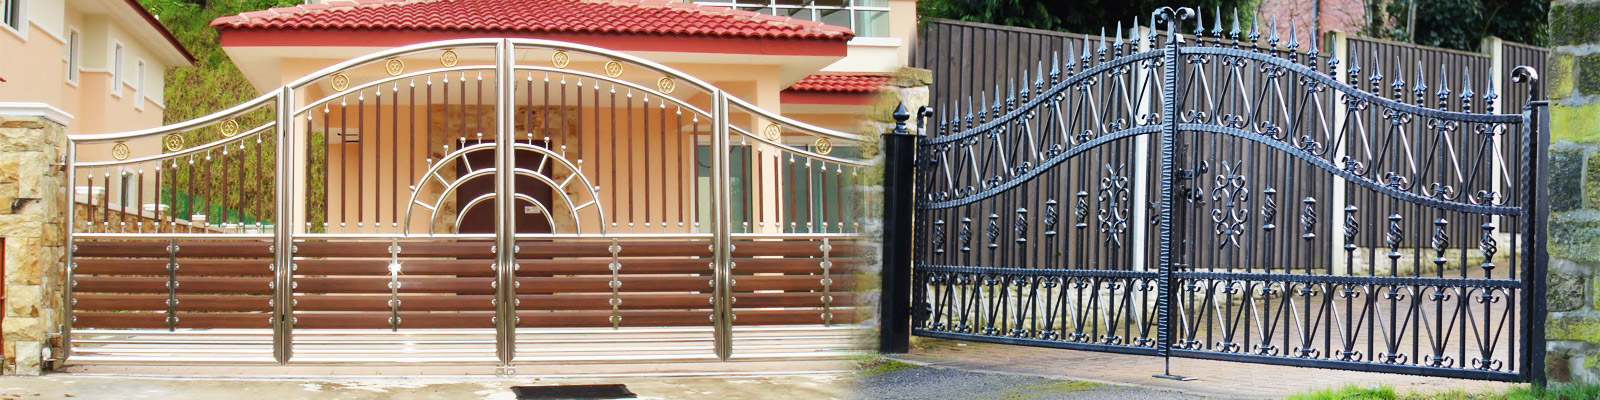 Iron Main Gate Manufacturer for Home in Gurgaon, Steel Main Gate Manufacturer for Home in Gurgaon, Stainless Steel Main Gate Manufacturer of House in Gurgaon, Iron Main Gate Manufacturer of House in Gurgaon, Domestic Gate for Home of Iron & Steel in Gurgaon